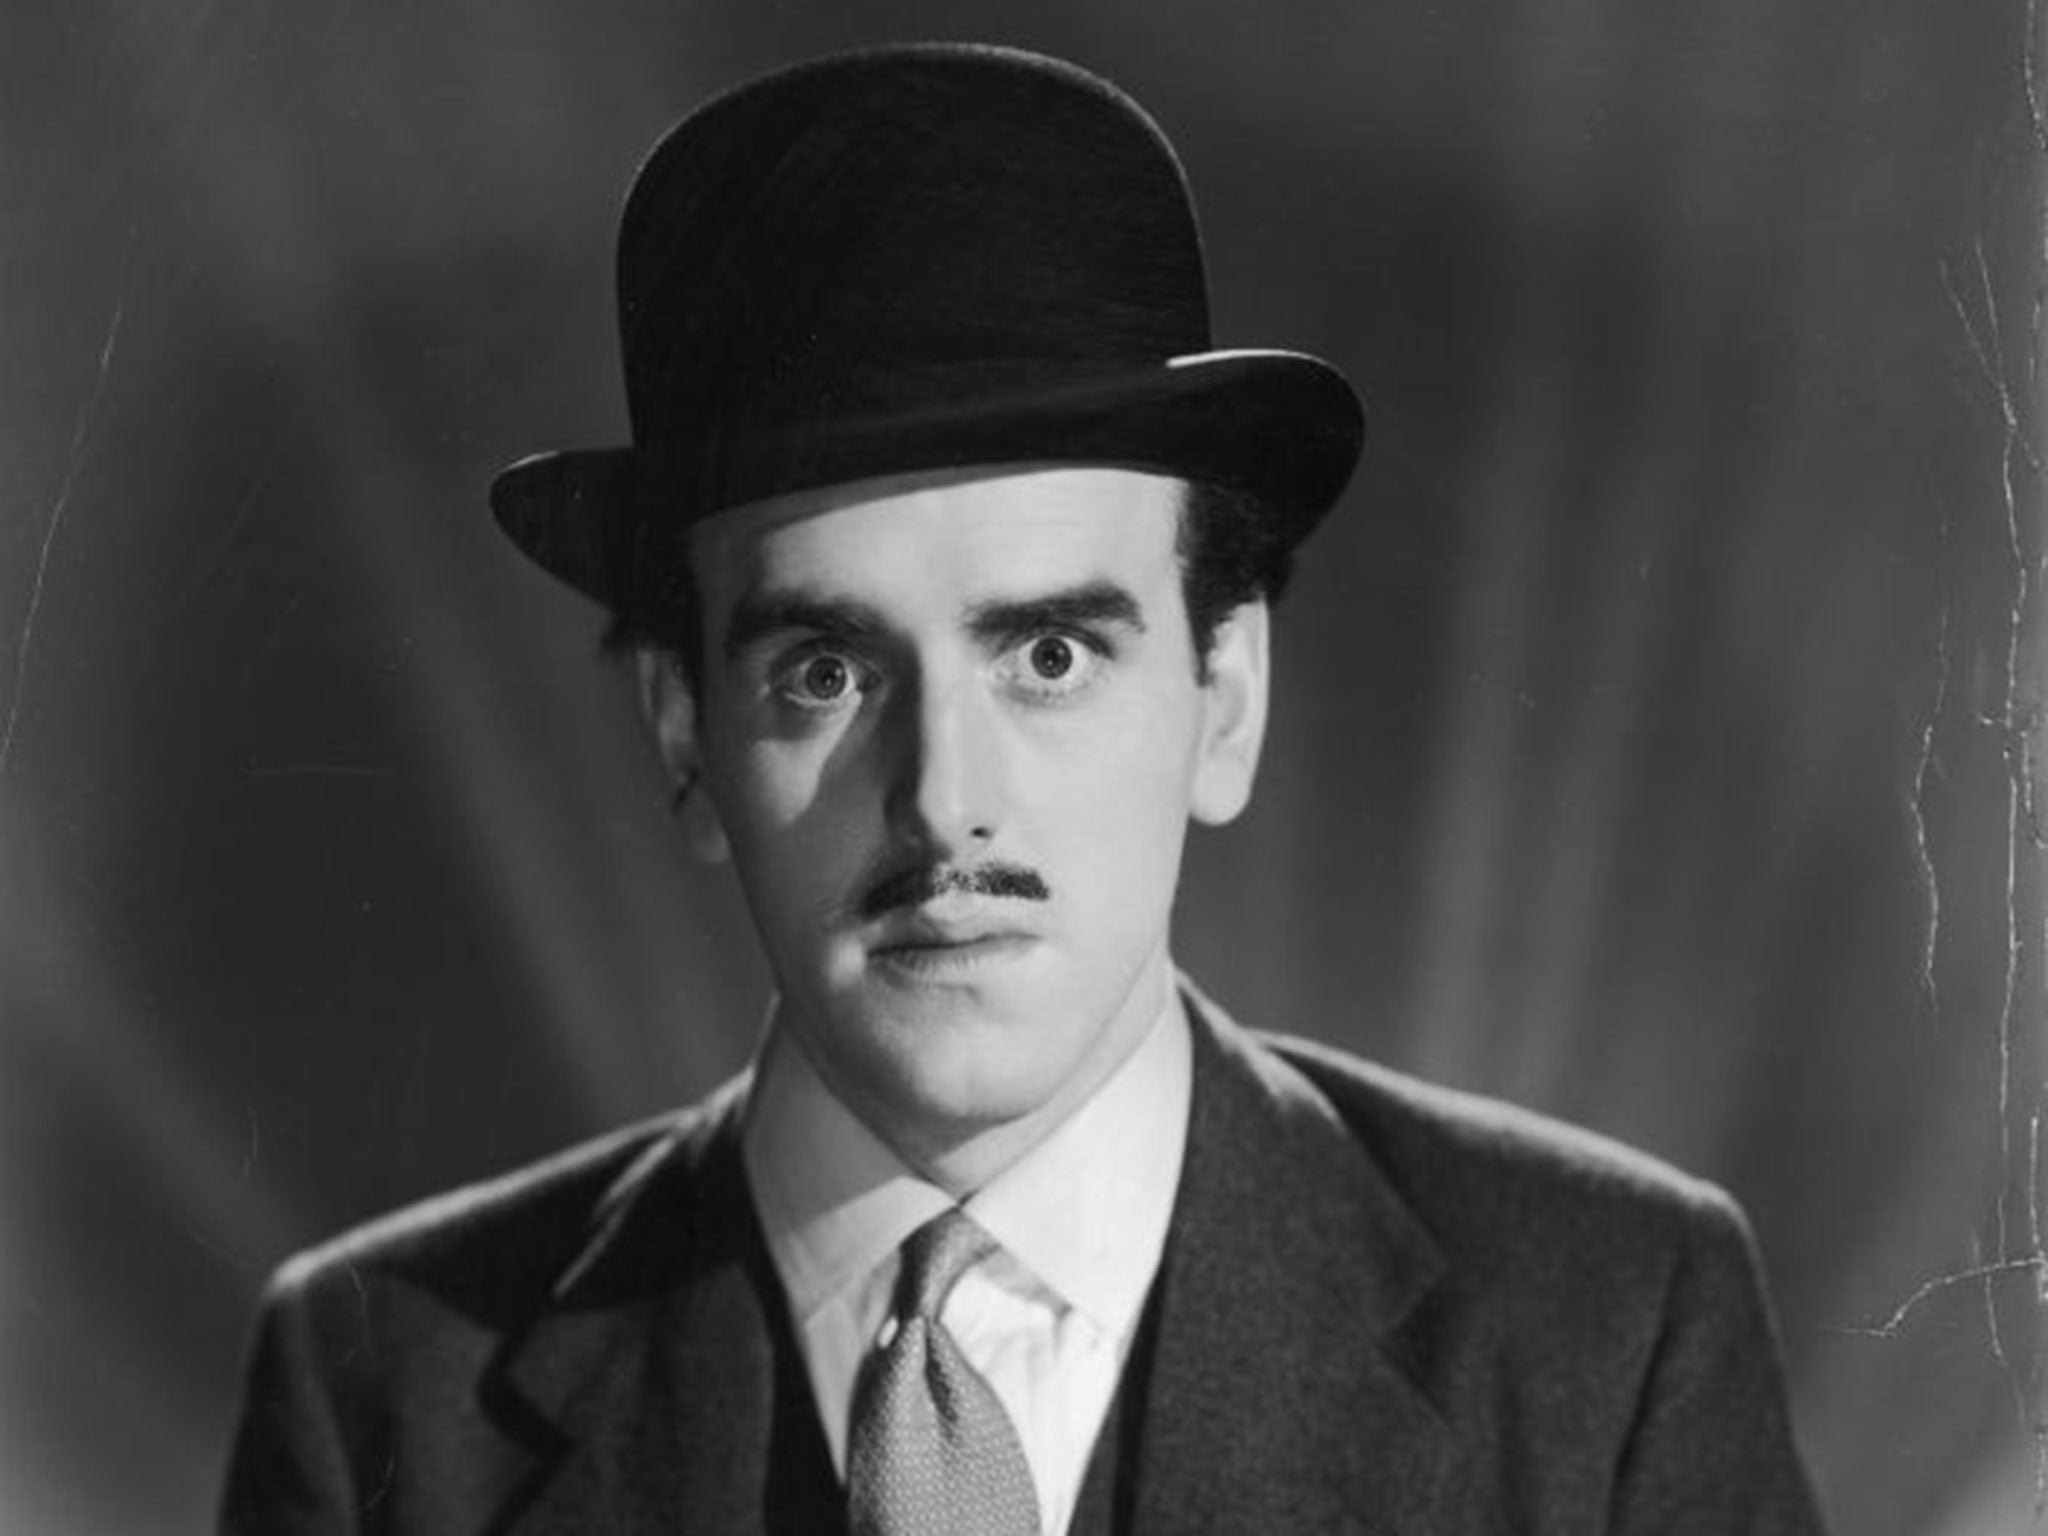 George Cole wearing a bowler hat in 1955